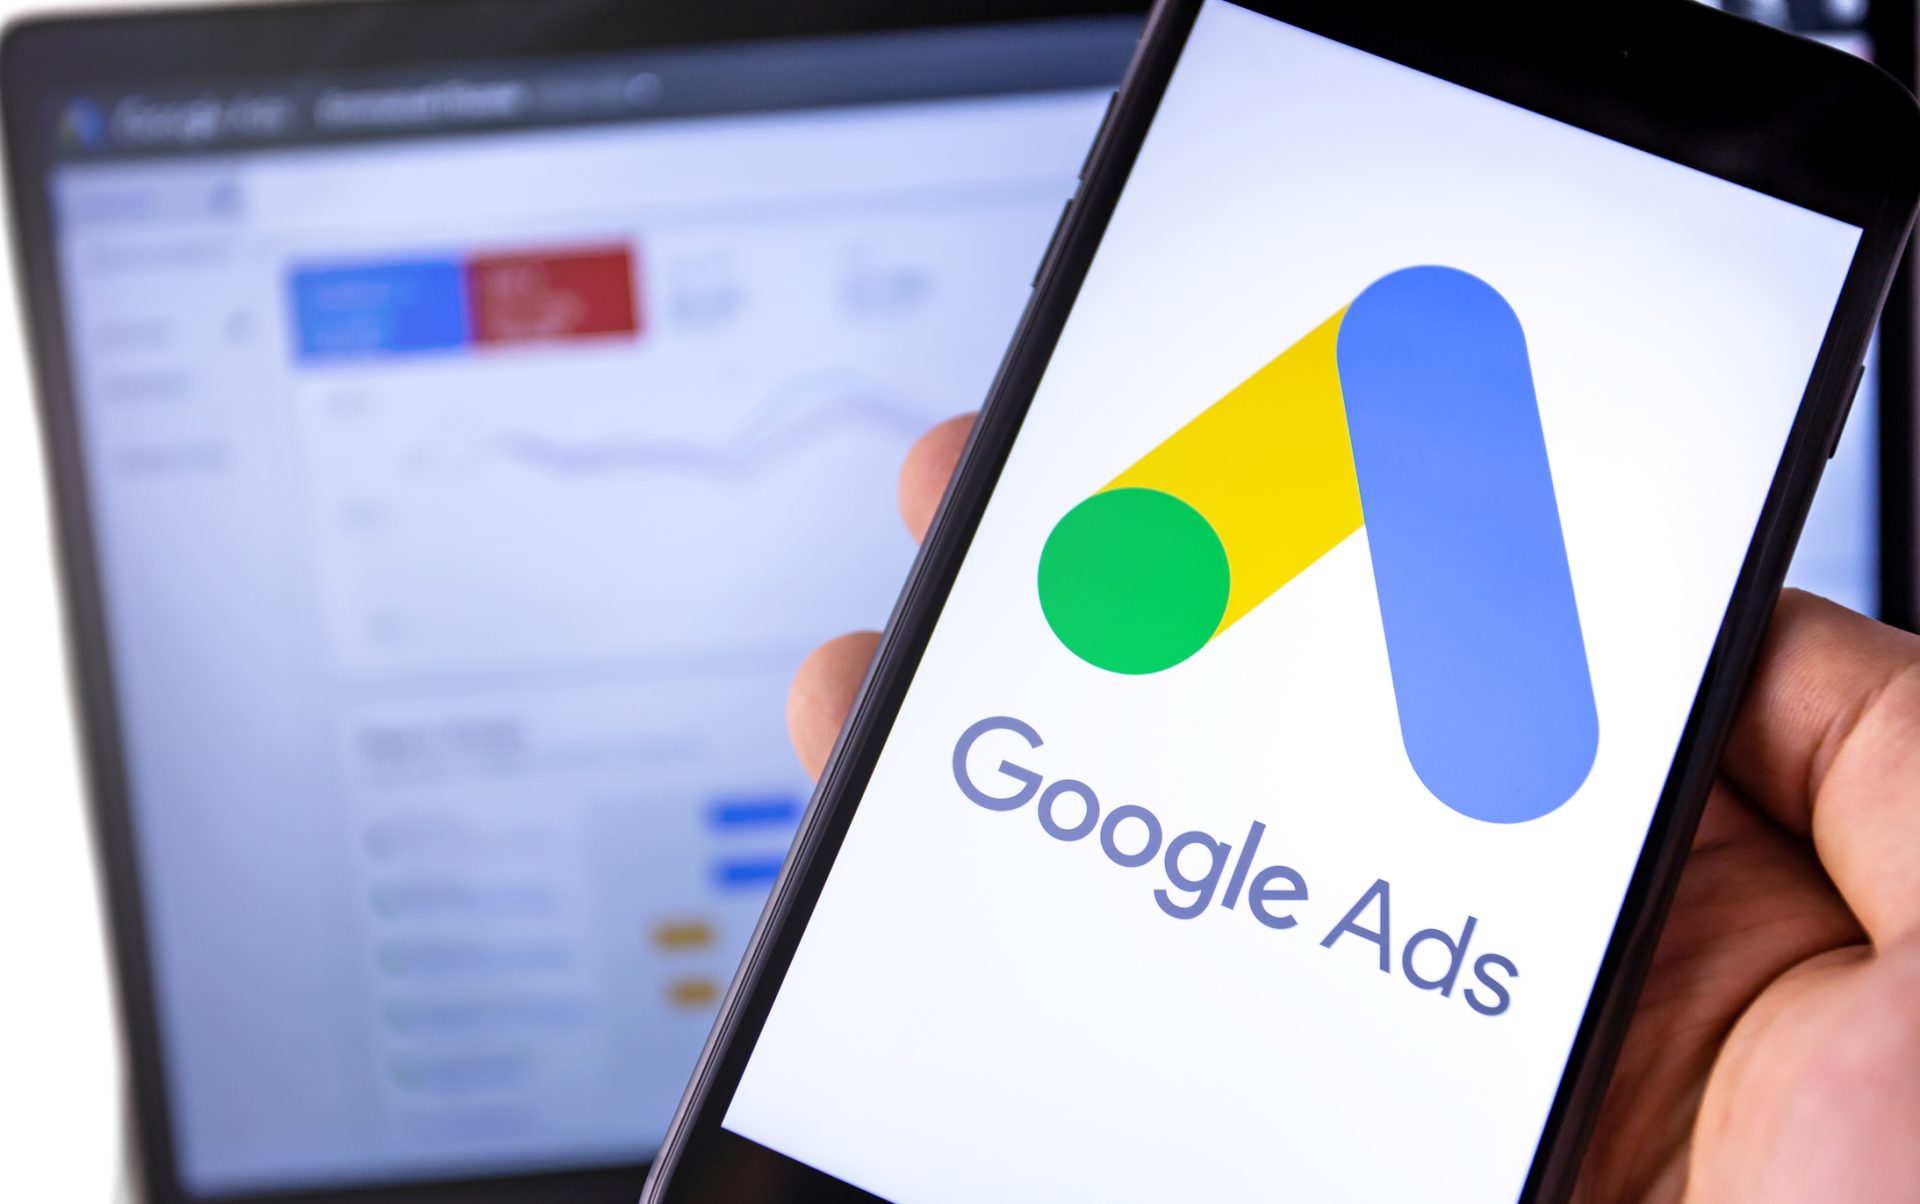 A desktop and mobile showing the Google Ads dashboard